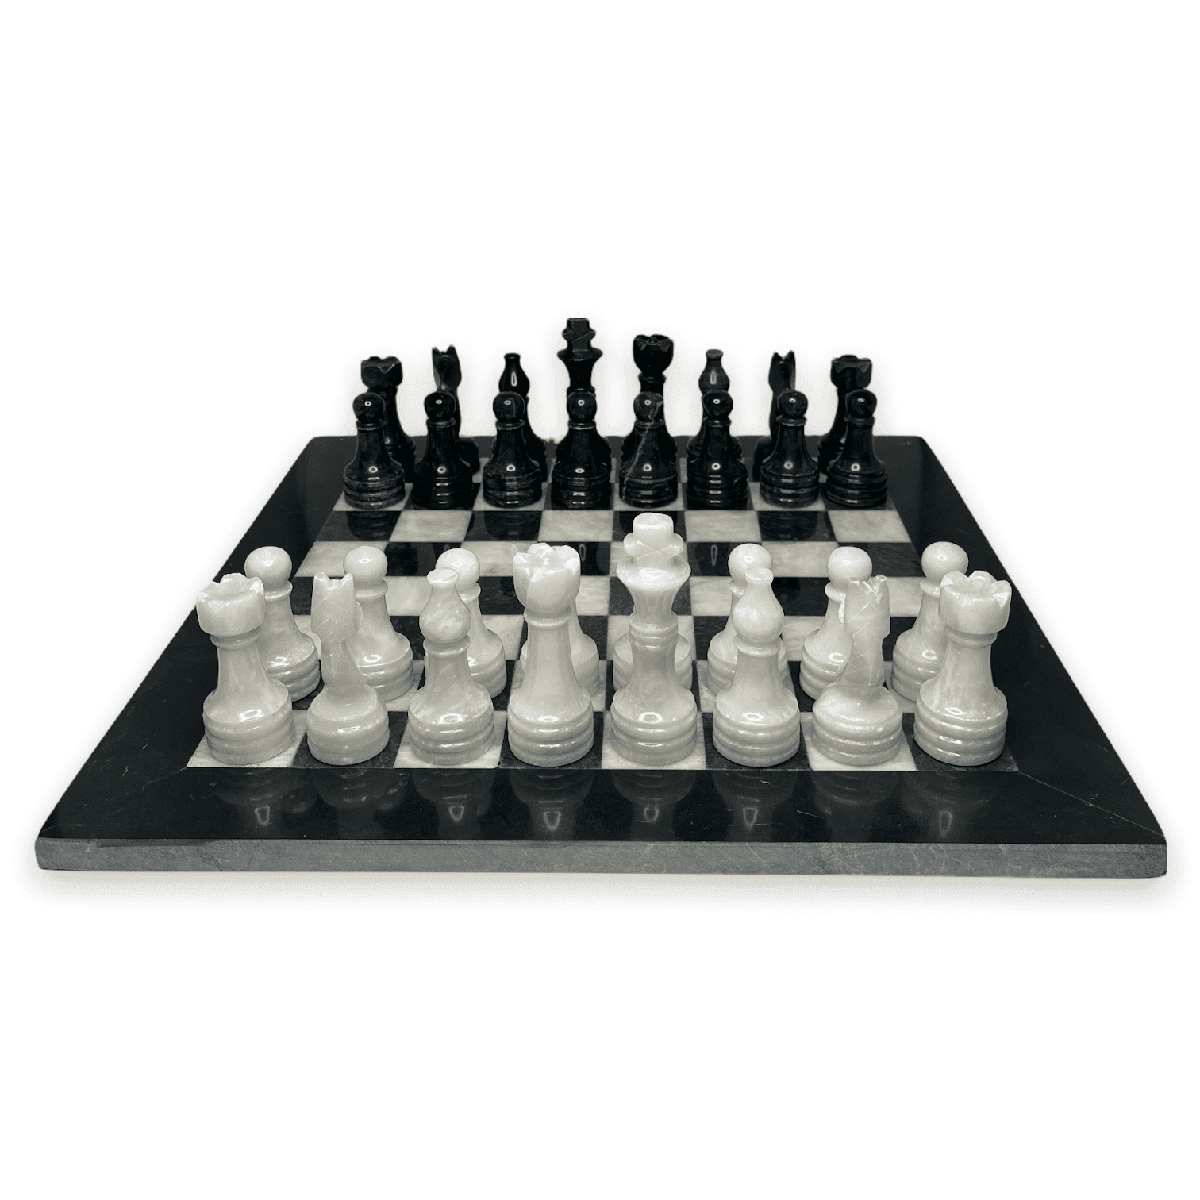 Marble Chess Set with Storage Case - Black and White - Marble Cultures